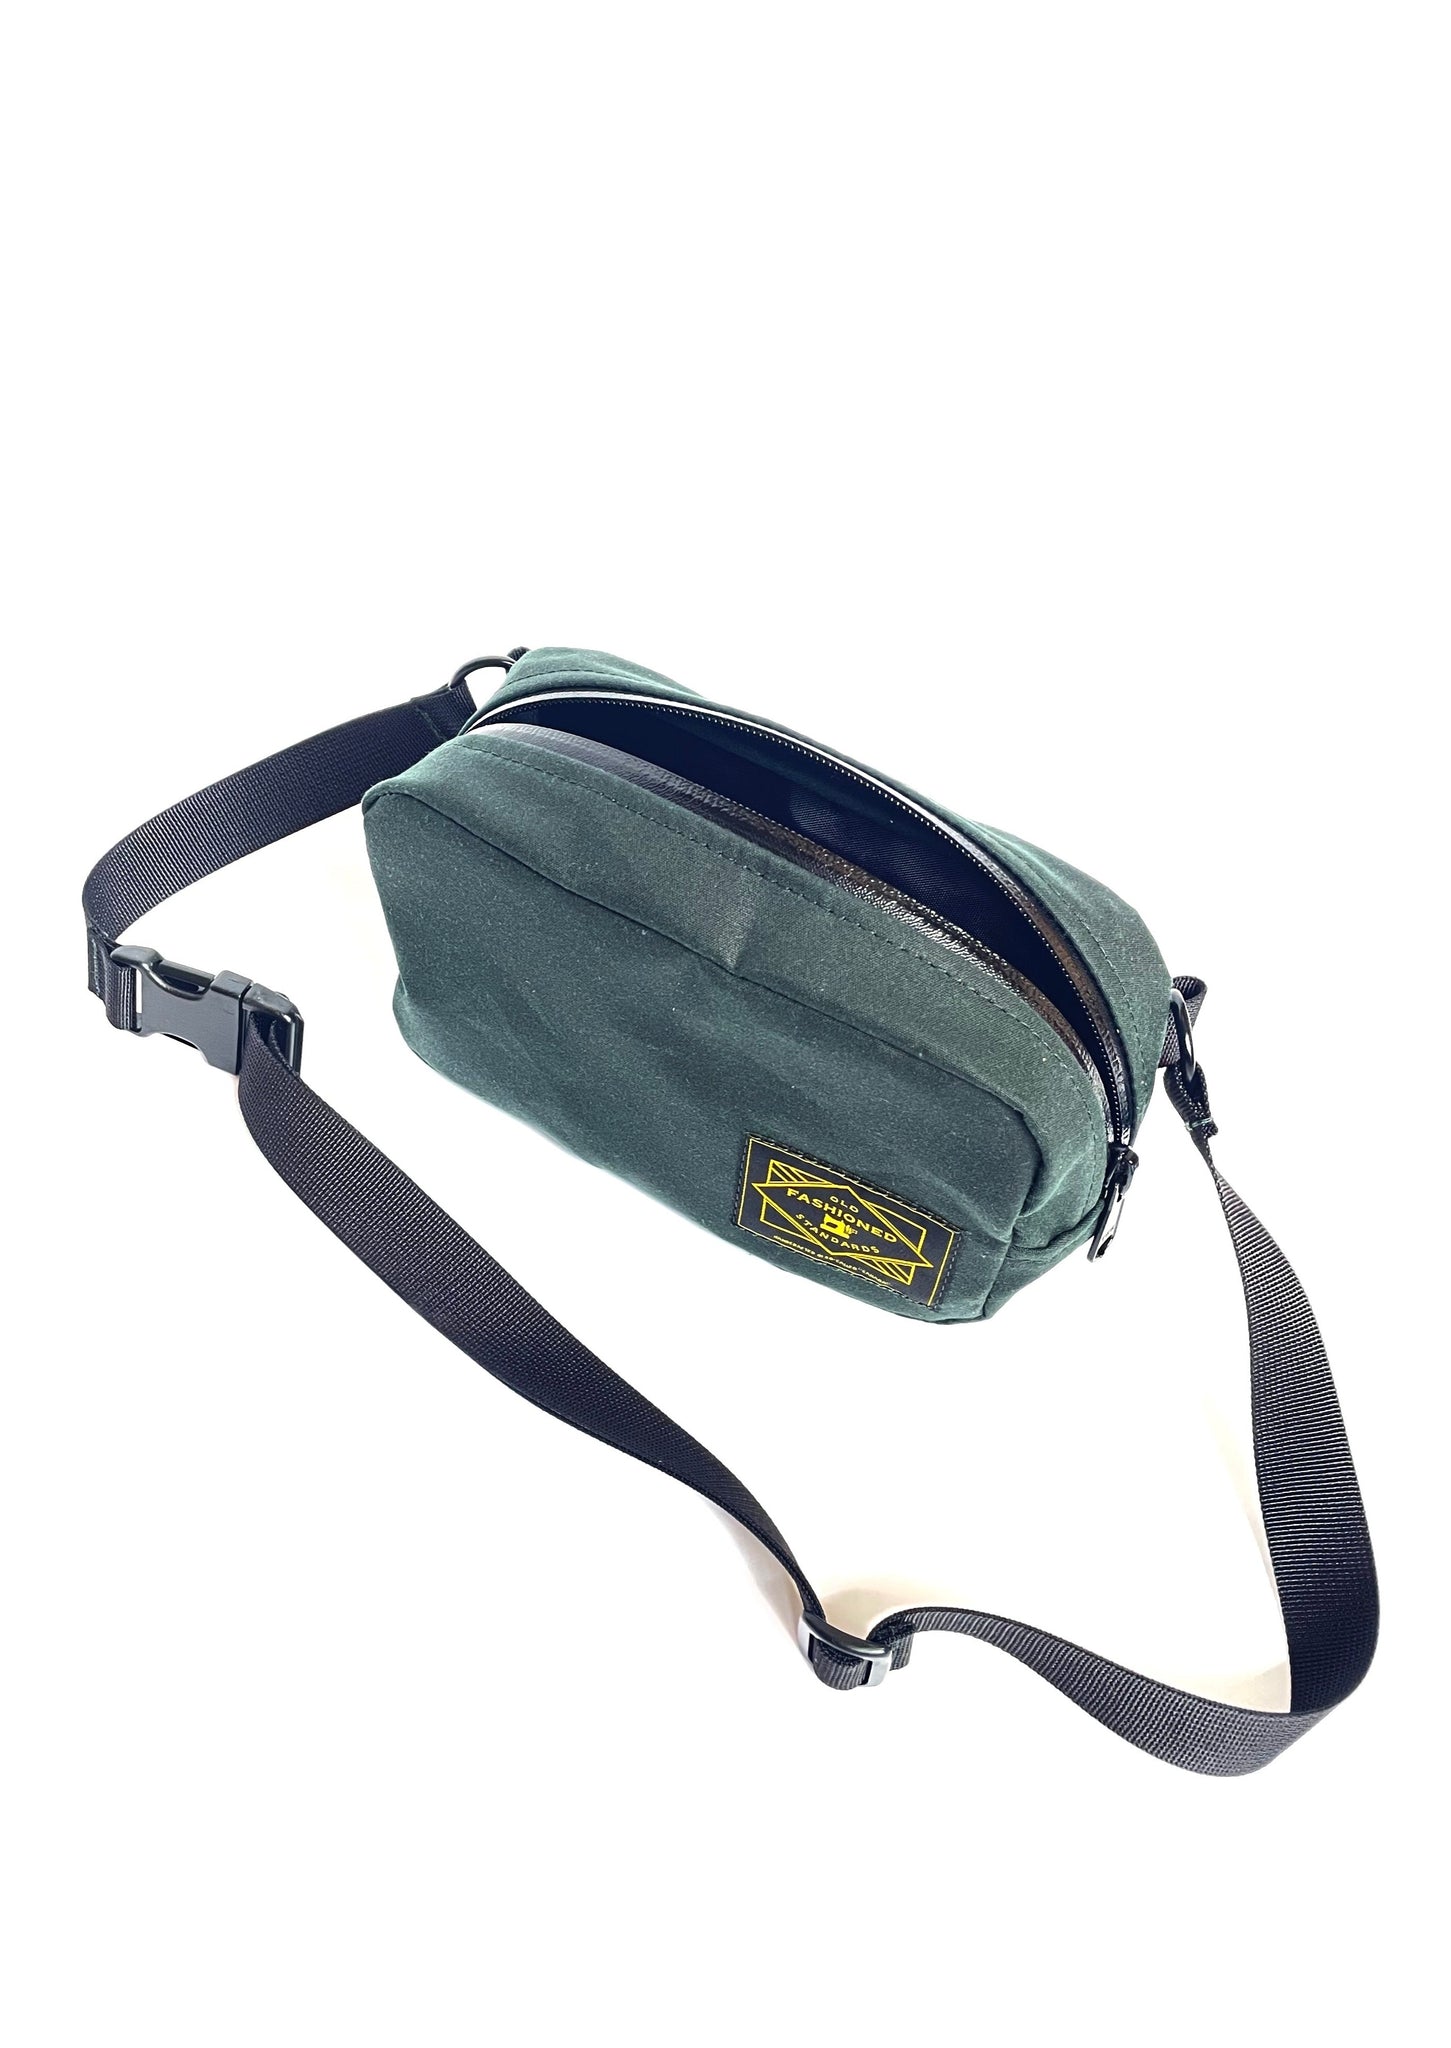 The Essential Fanny Pack's